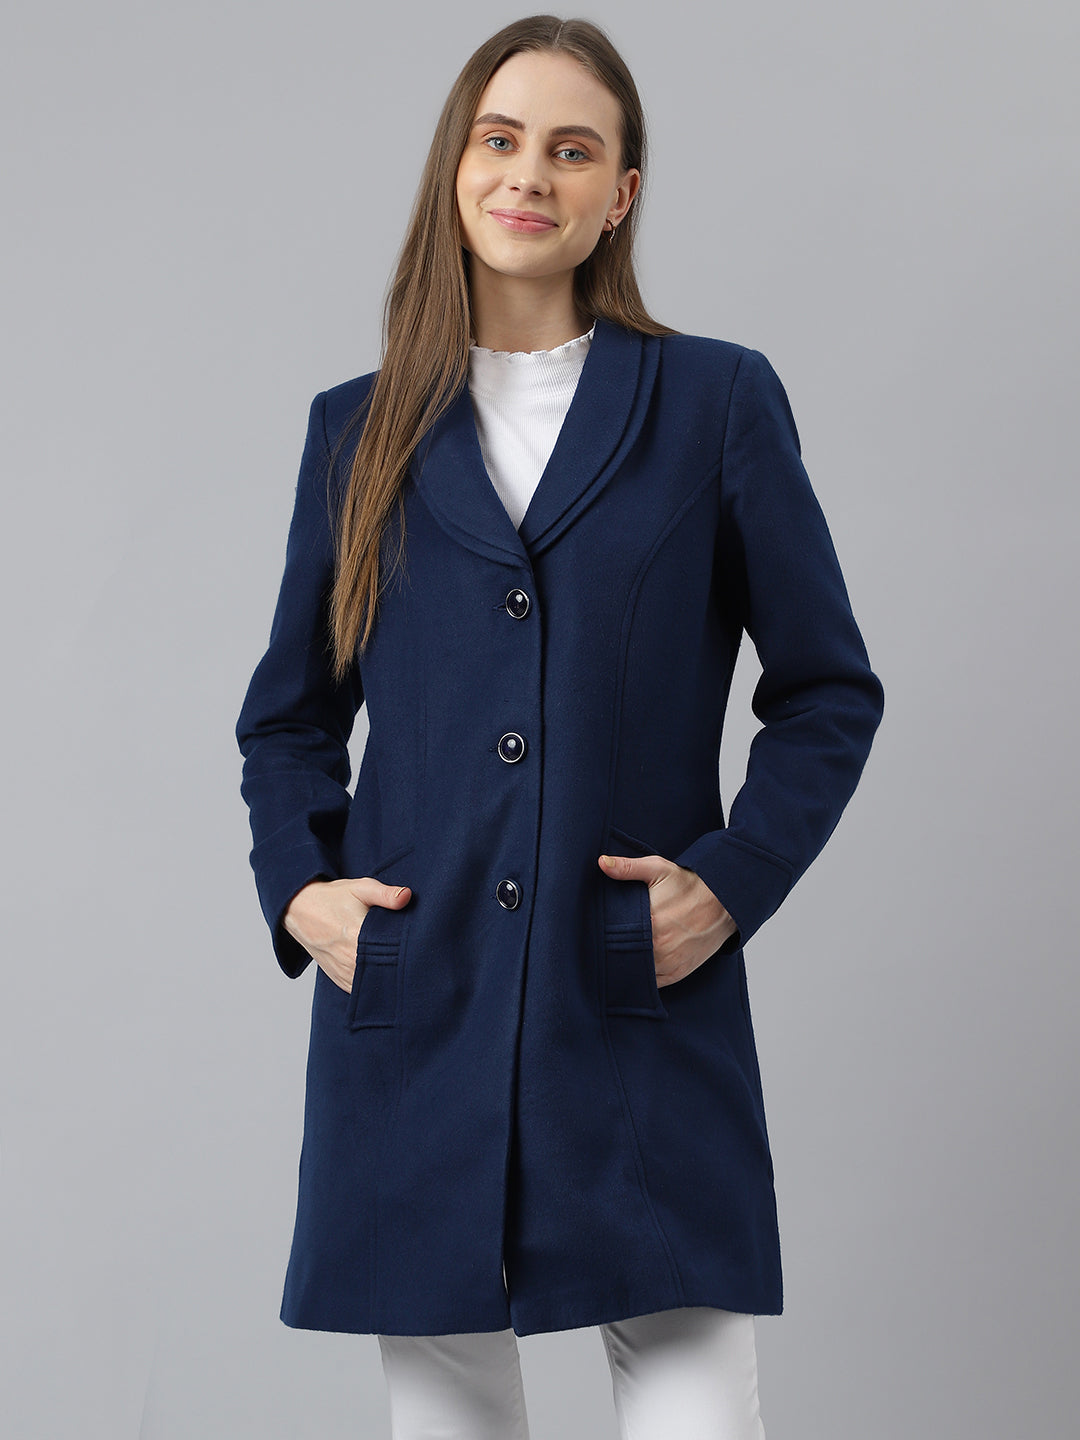 Blue Full Sleeve Women Over Coat Jacket For Party